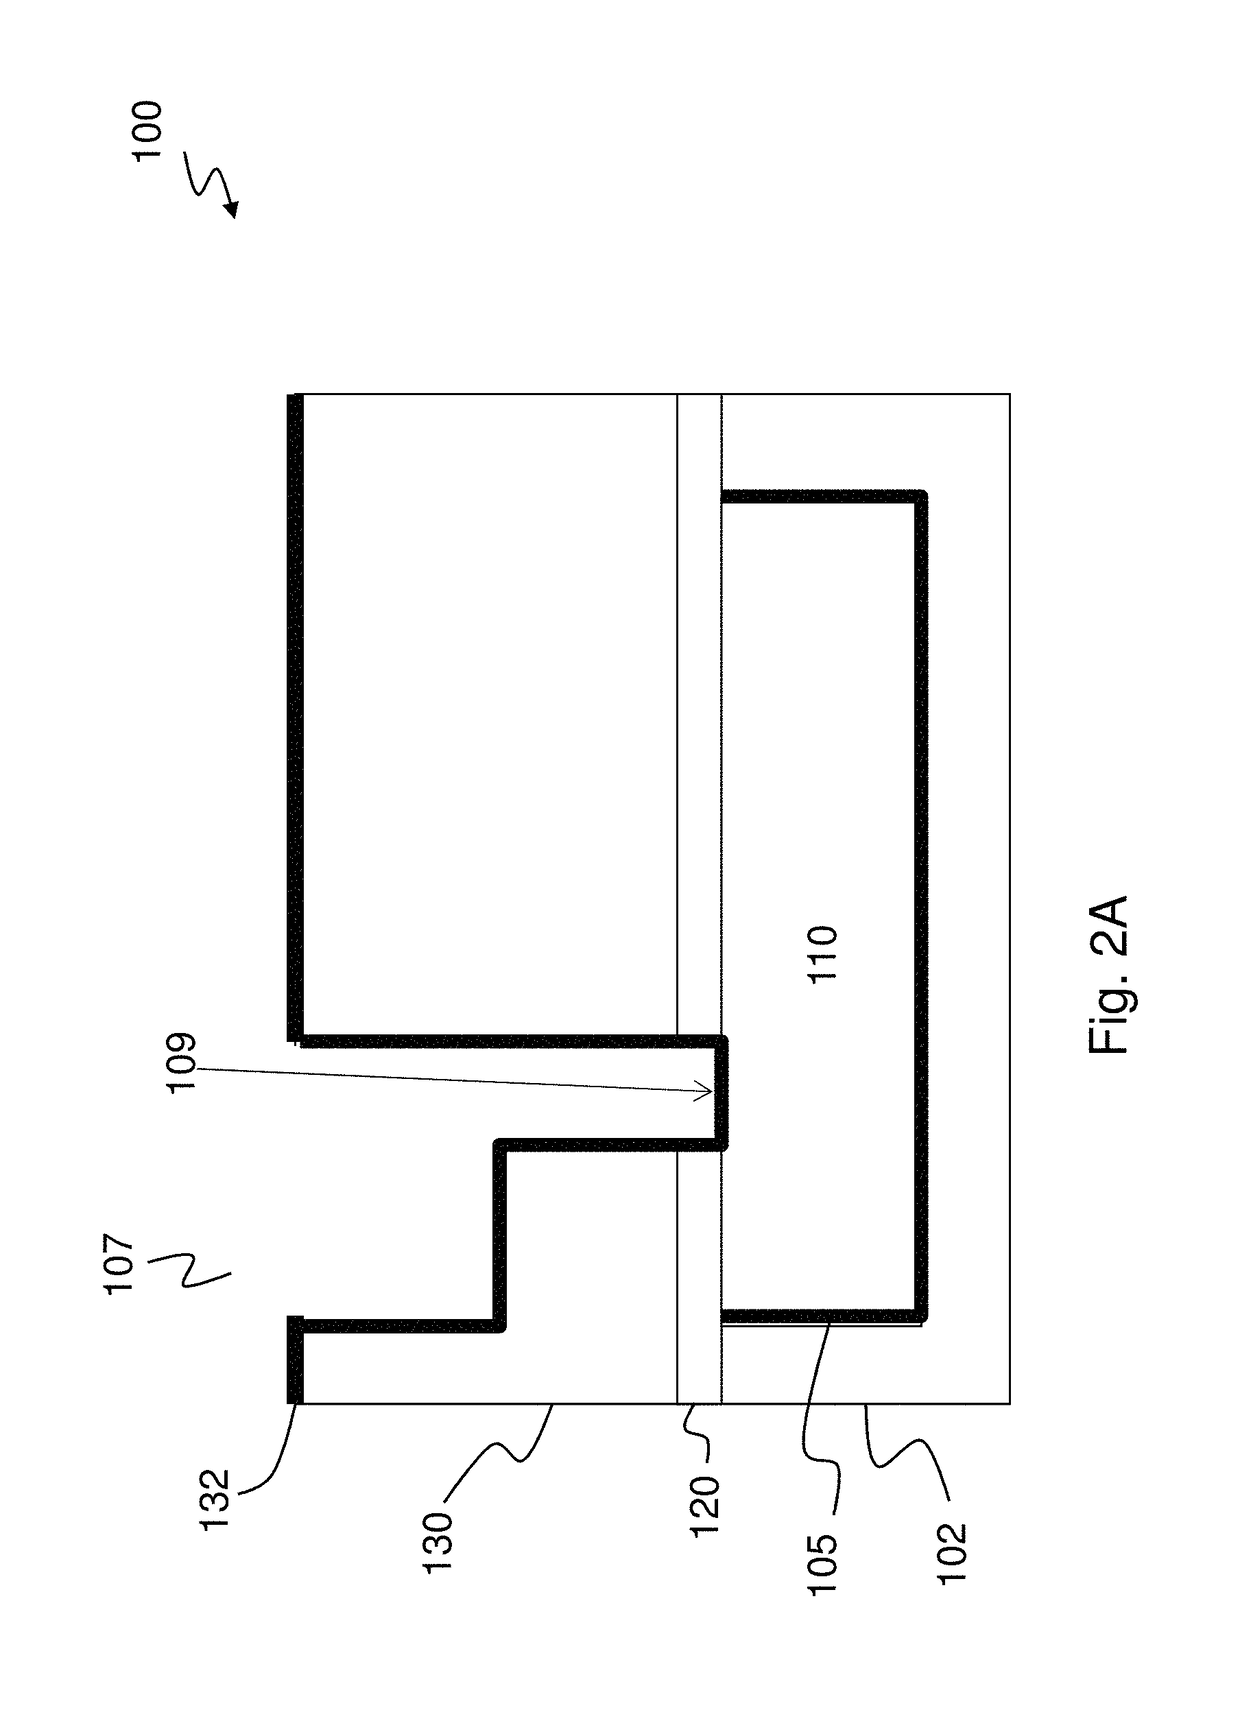 Method and apparatus for single chamber treatment